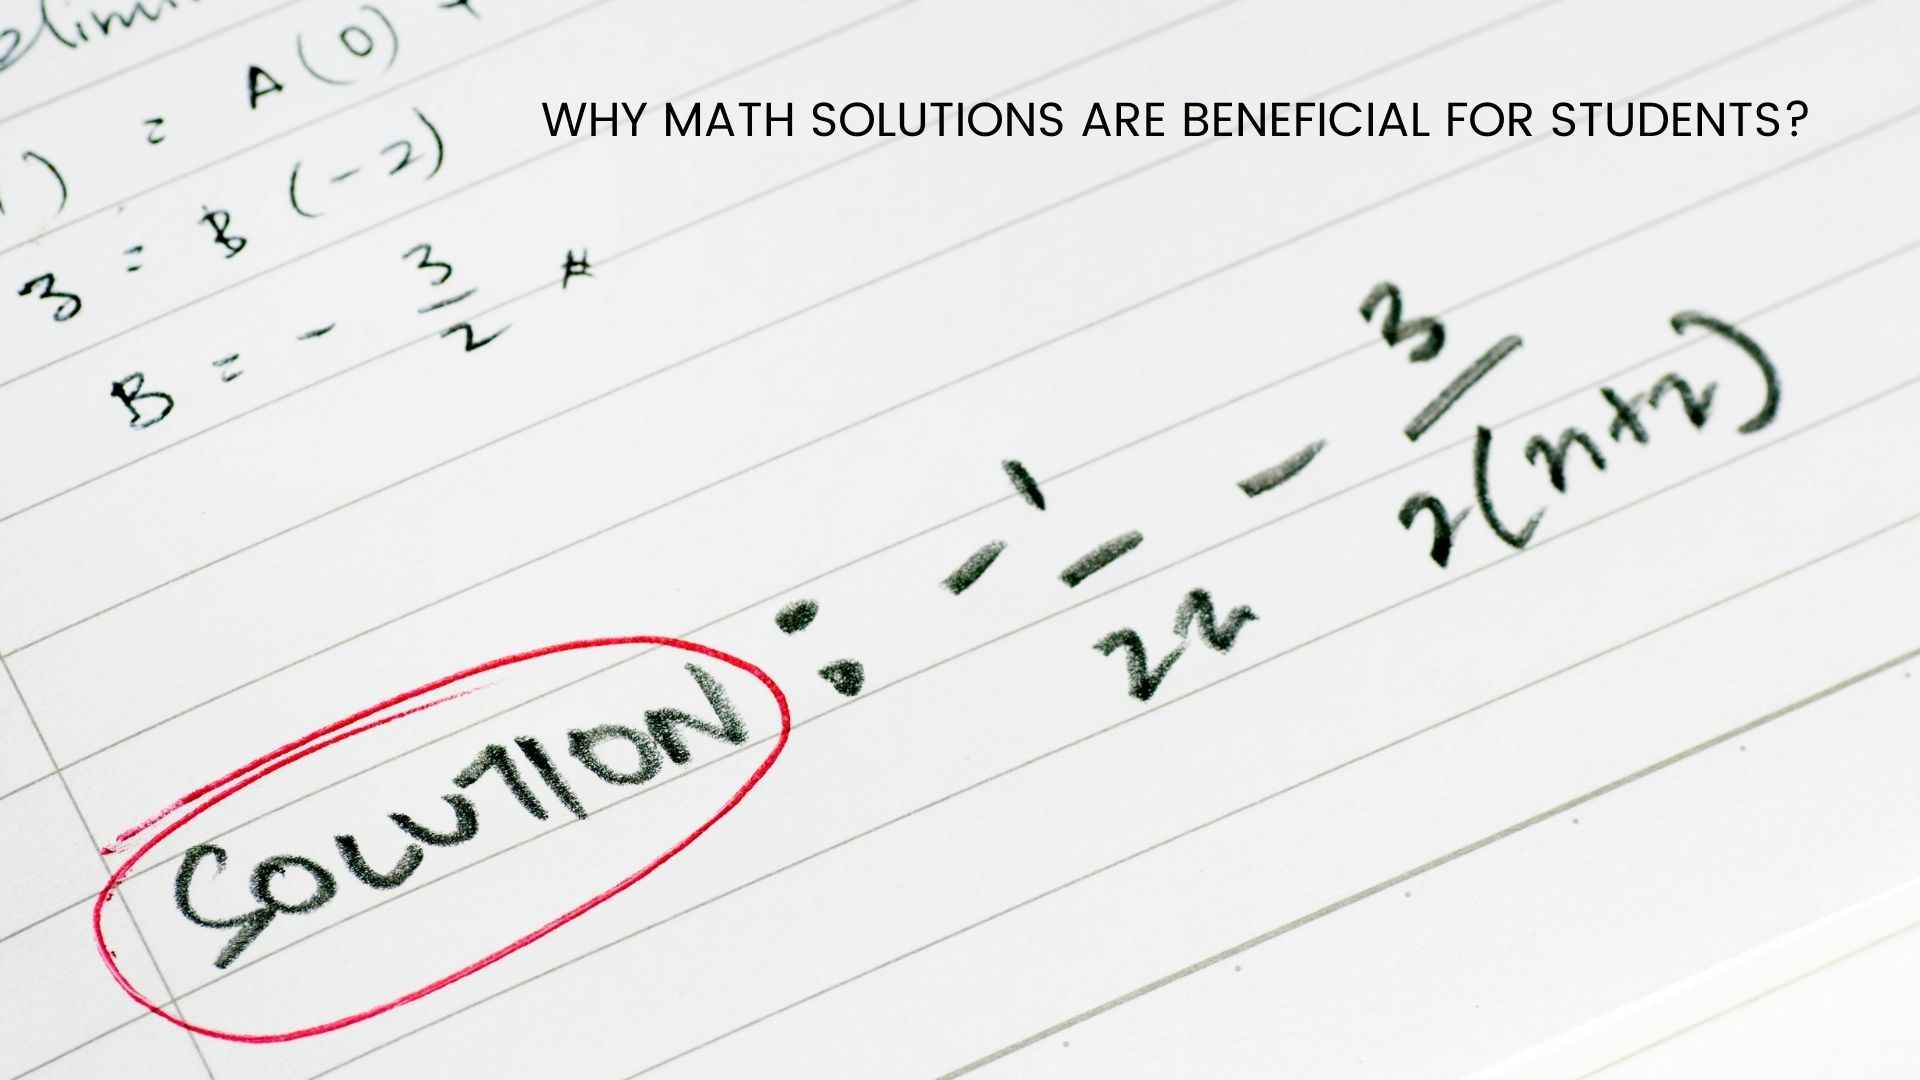 WHY MATH SOLUTIONS ARE BENEFICIAL FOR STUDENTS?